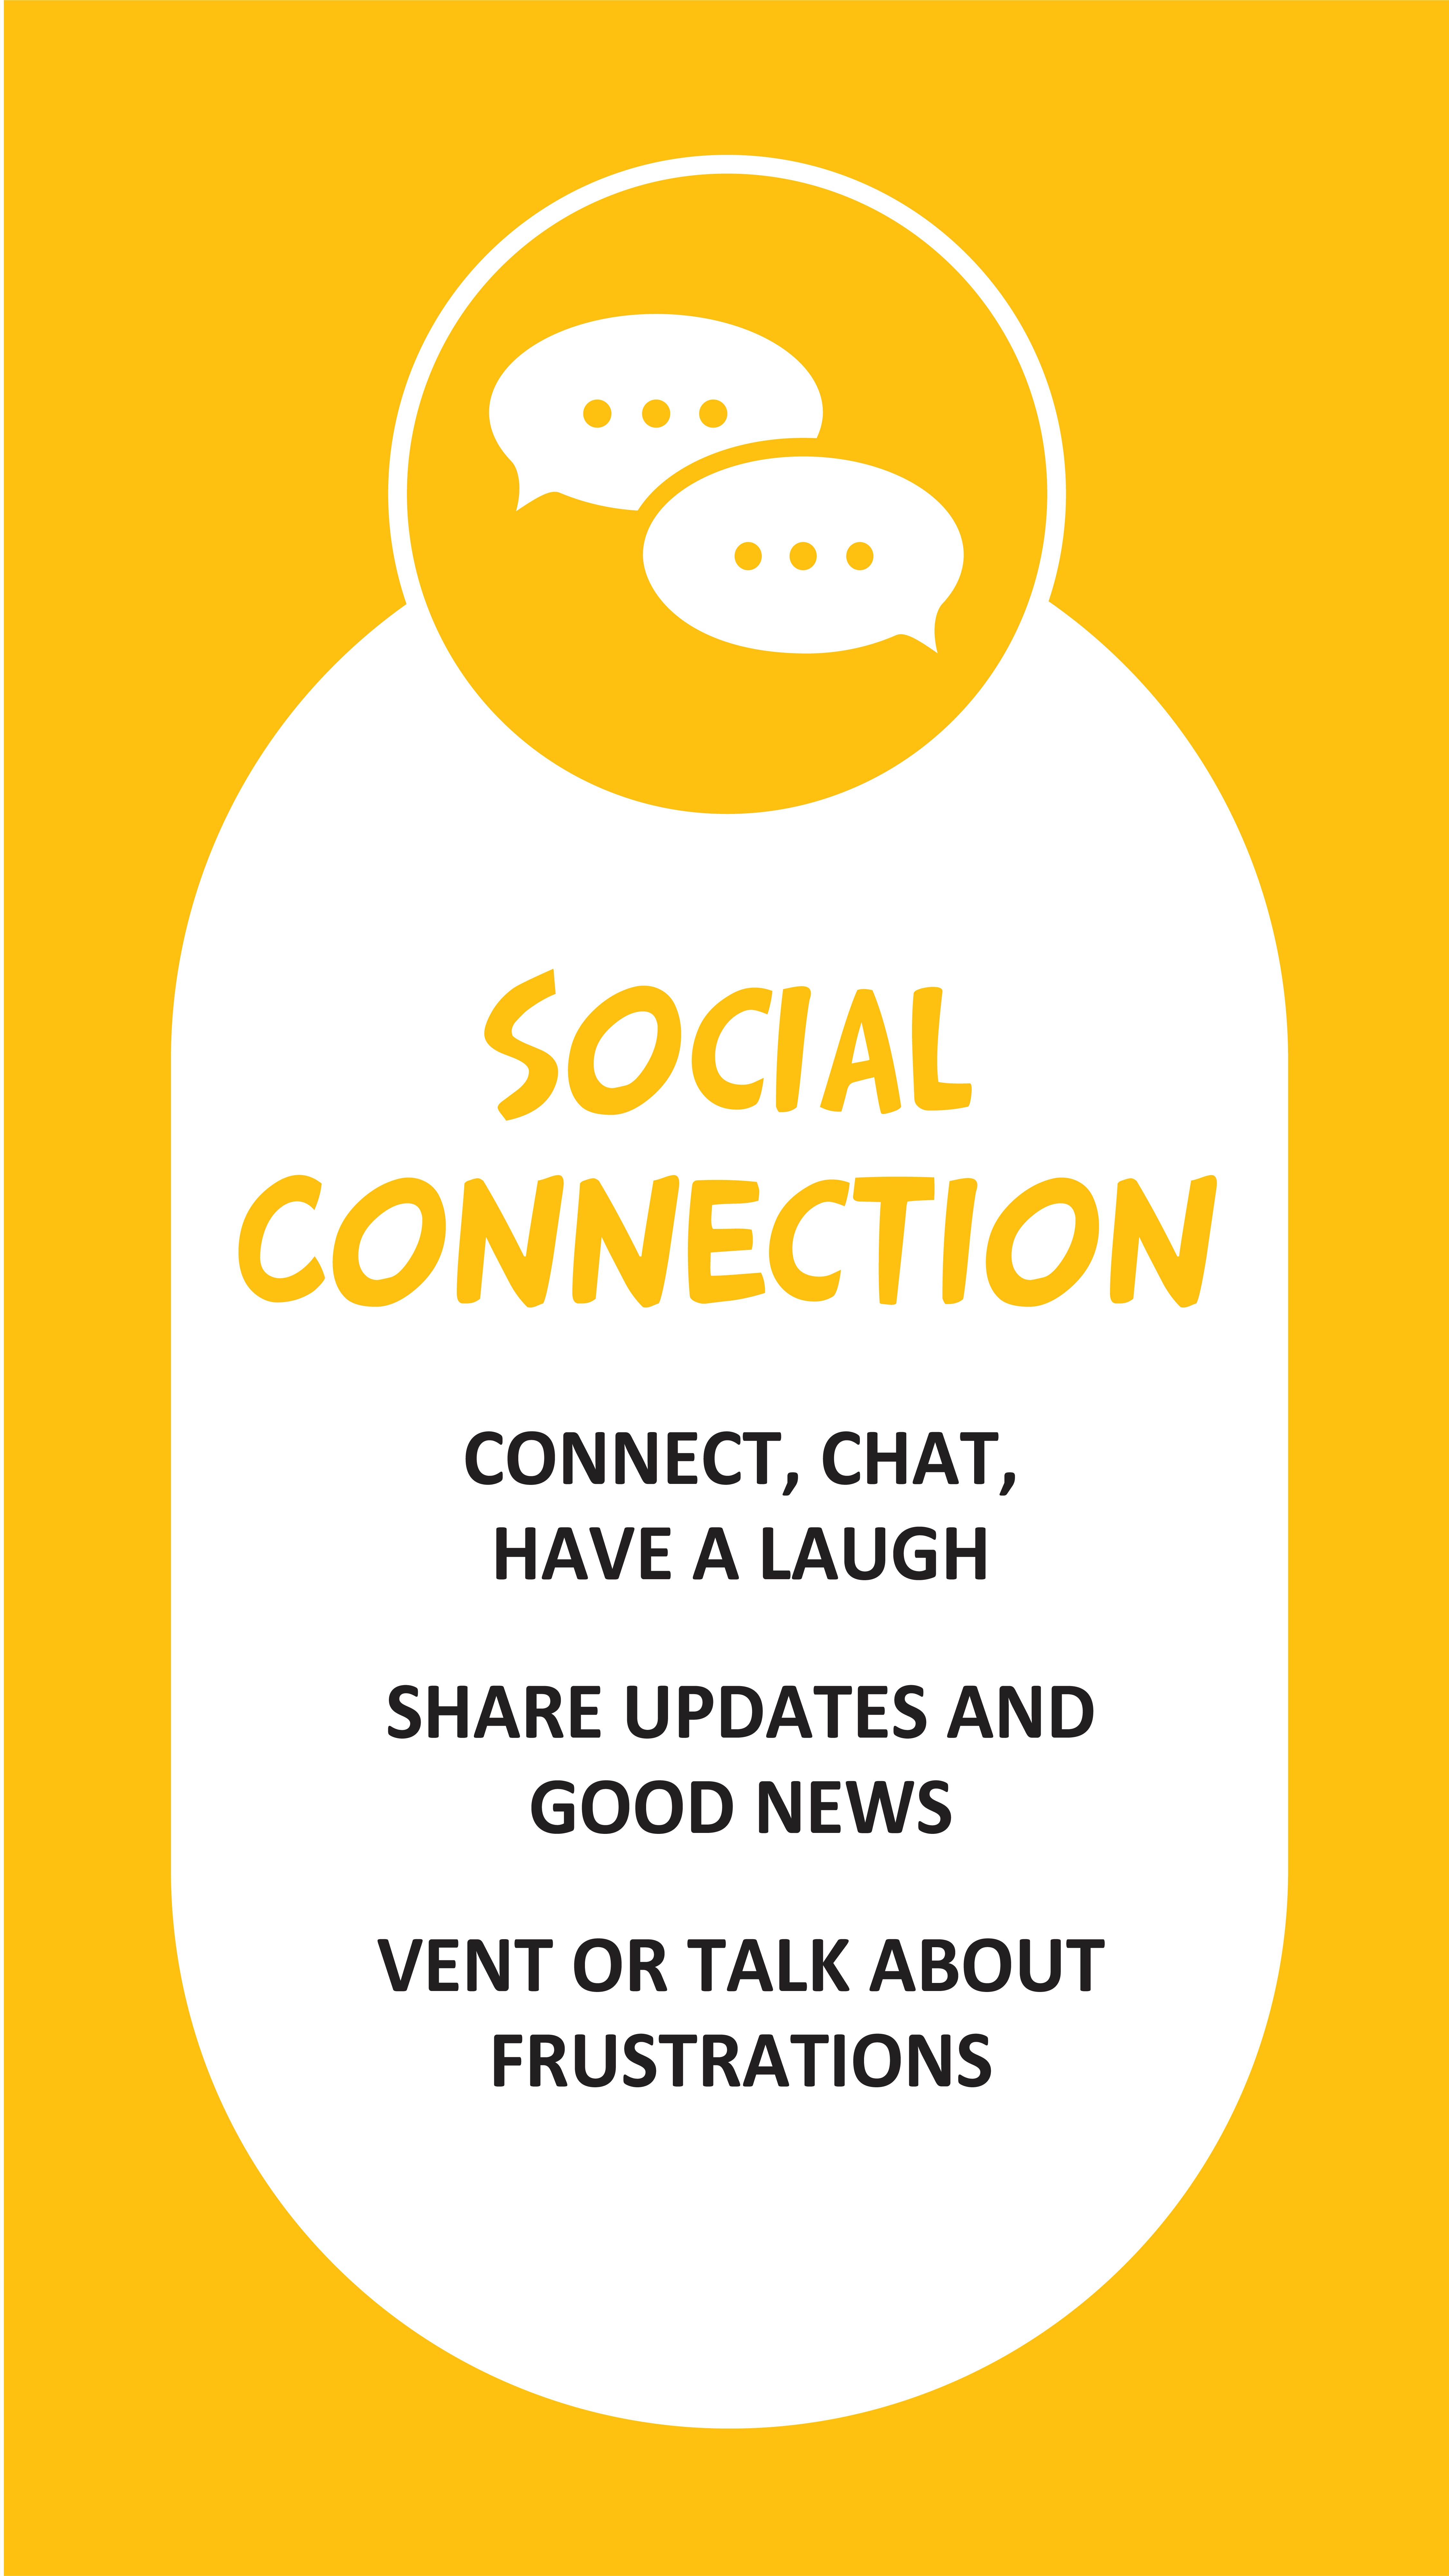 Social Connection: Connect, chat, have a laugh! Share updates and good news. Vent or talk about frustrations. 